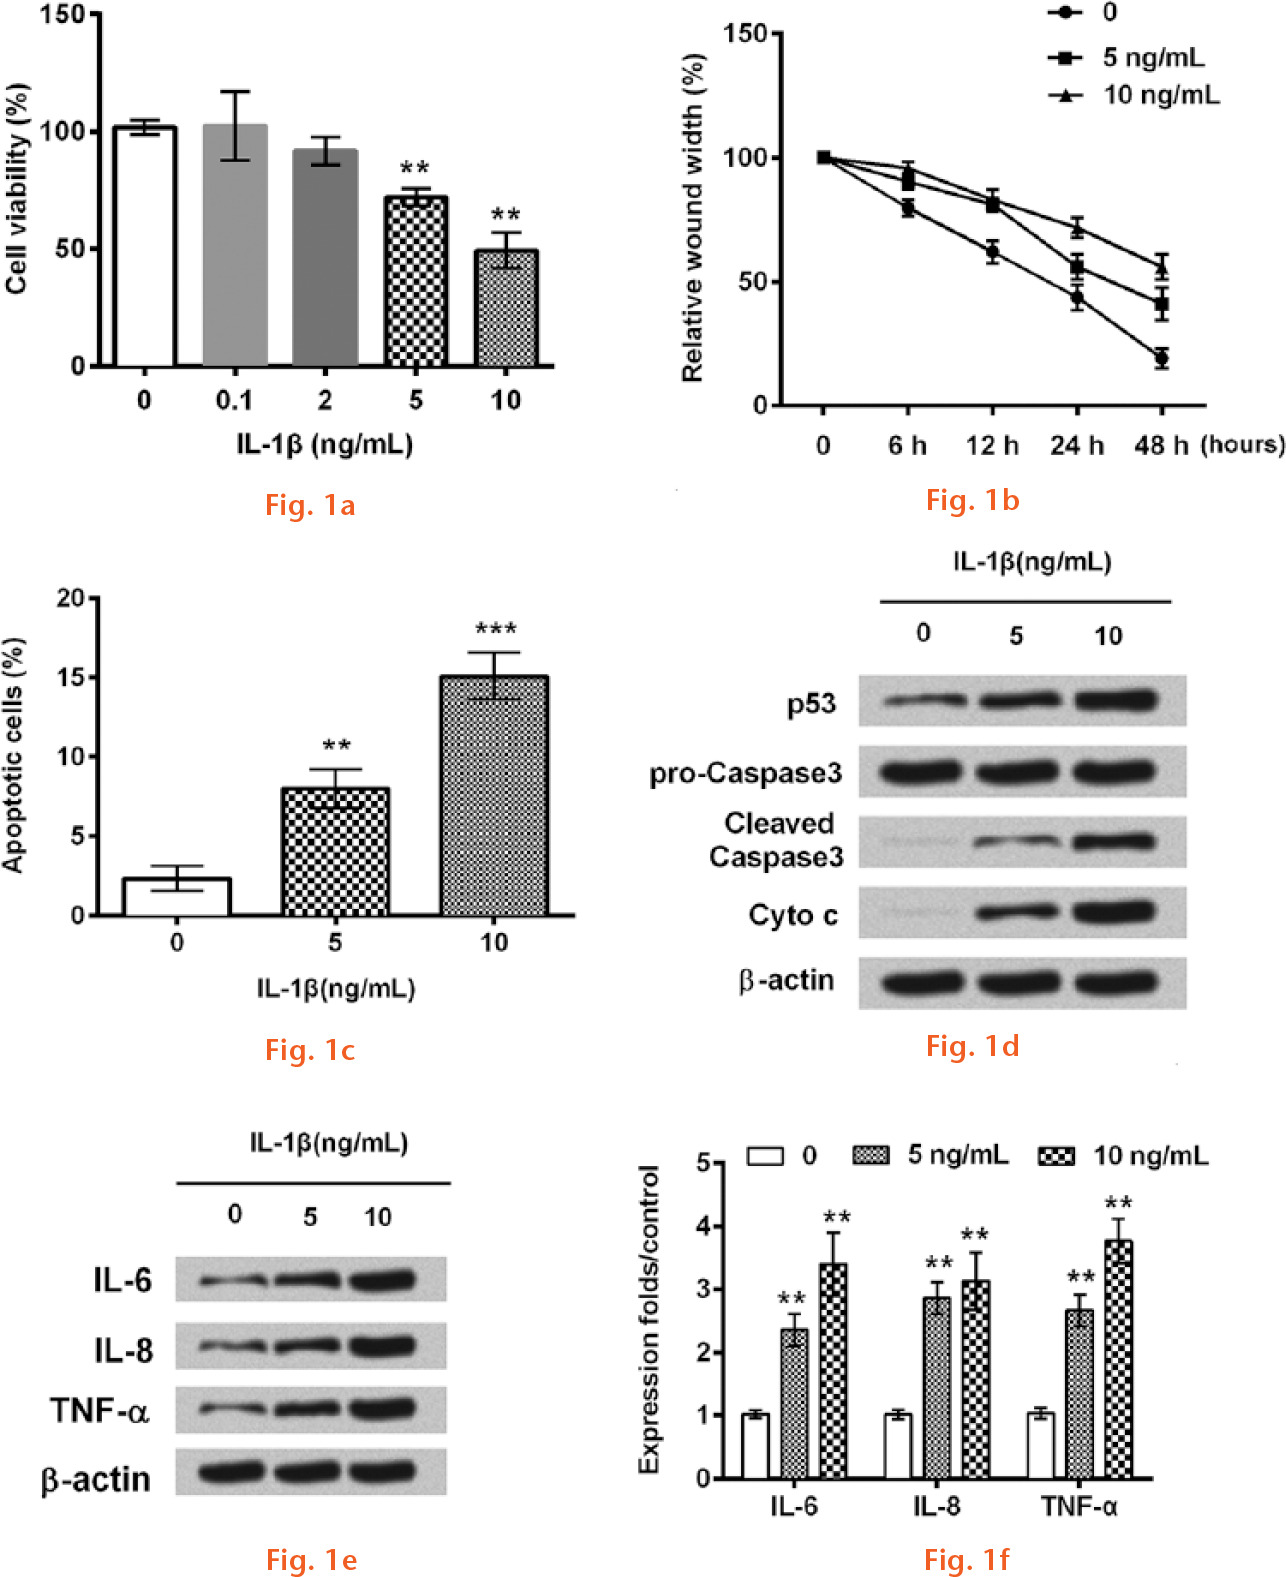  
            Interleukin (IL)-1β induced chondrocyte inflammation in vitro. The human chondrocyte cell line CHON-001 was administrated by different concentrations of IL-1β (0.1 ng/ml, 2 ng/ml, 5 ng/ml, and 10 ng/ml) to simulate inflammation. a) Graph showing the Cell Counting Kit-8 (CCK-8) analysis results of cell viability after IL-1β administration. b) Graph showing the relative wound width at different time points after IL-1β administration. c) Graph showing the relative apoptotic cells after IL-1β administration. The protein immunoblots of: d) apoptosis-related factors, including Cytochrome C (Cyto C), Caspase 3, and p53, in CHON-001 cells; and e) pro-inflammatory cytokines (IL-6, IL-8, and tumour necrosis factor (TNF)-α) by Western blot assay. f) Graph showing the relative expression levels of IL-6, IL-8, and TNF-α. β-actin acted as an internal control (**p < 0.01; ***p < 0.001).
          